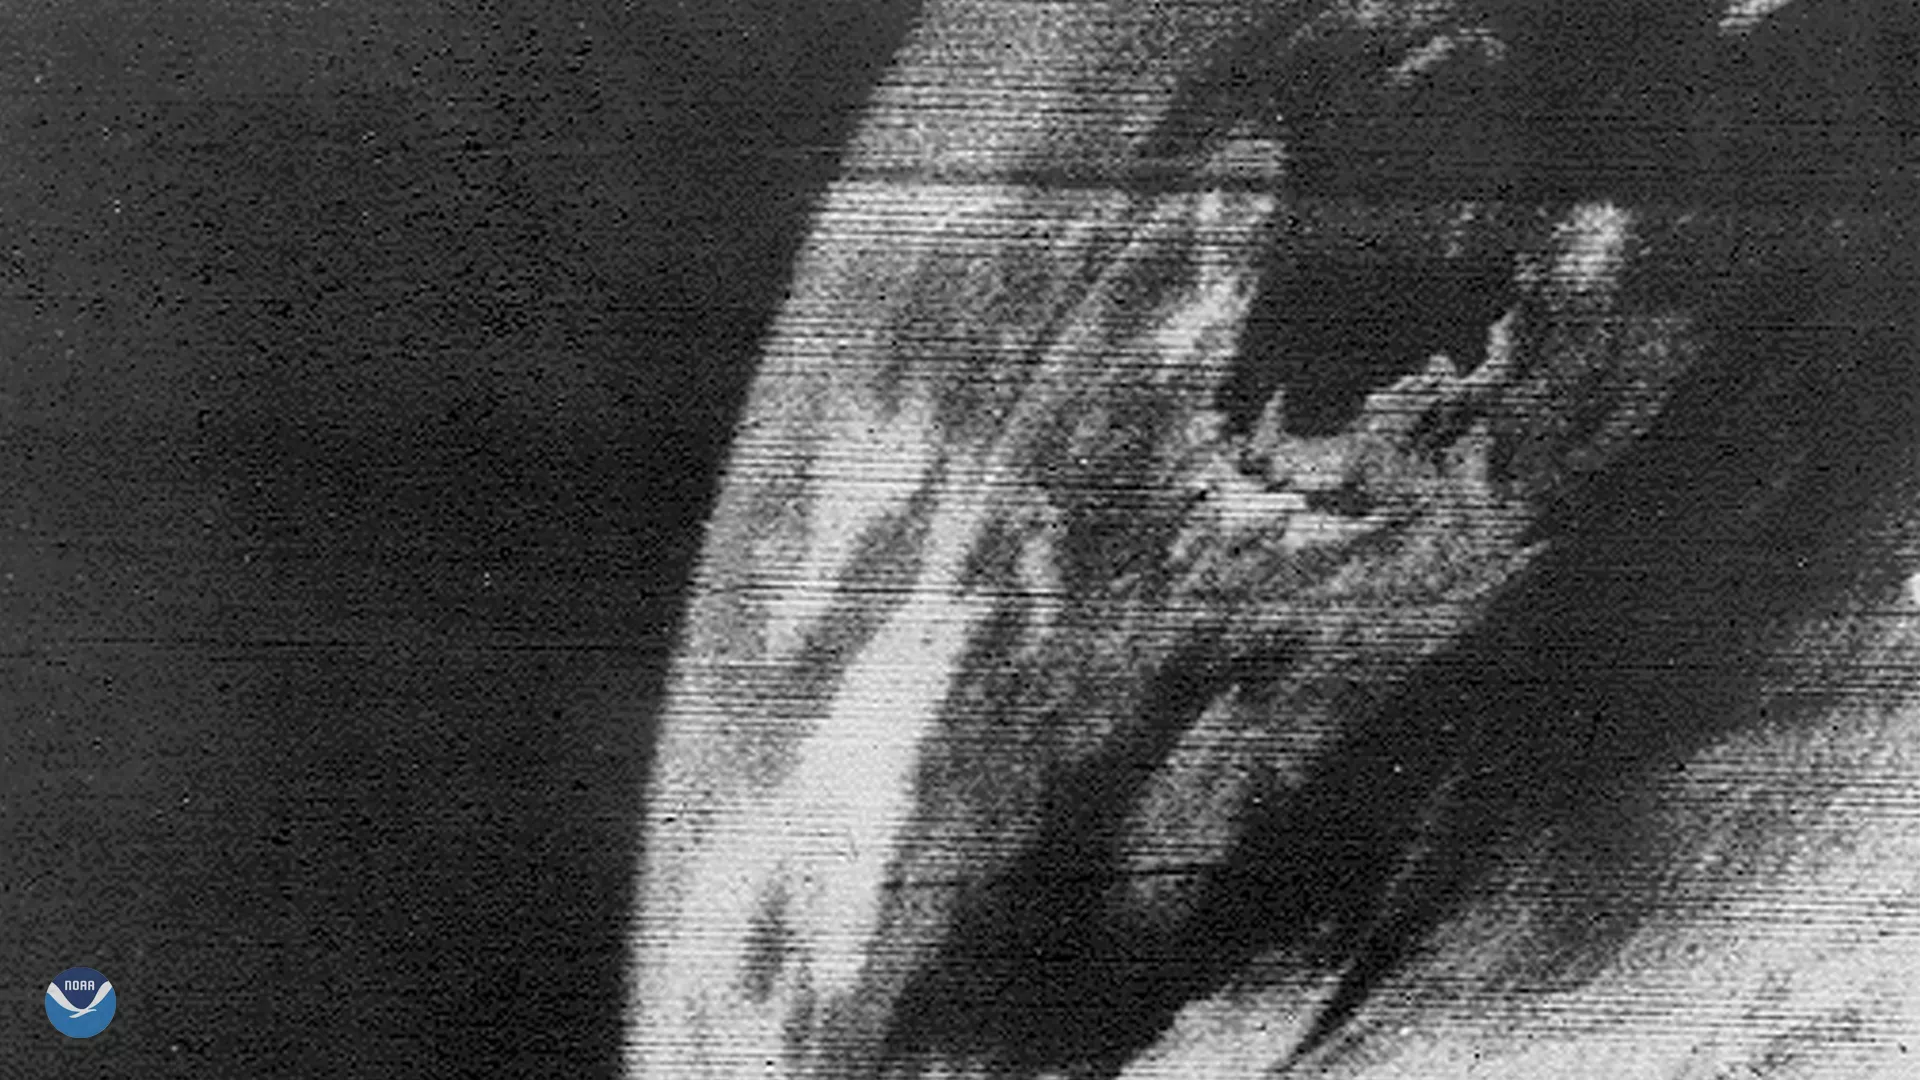 Blurry black and white image showing part of North America from space.